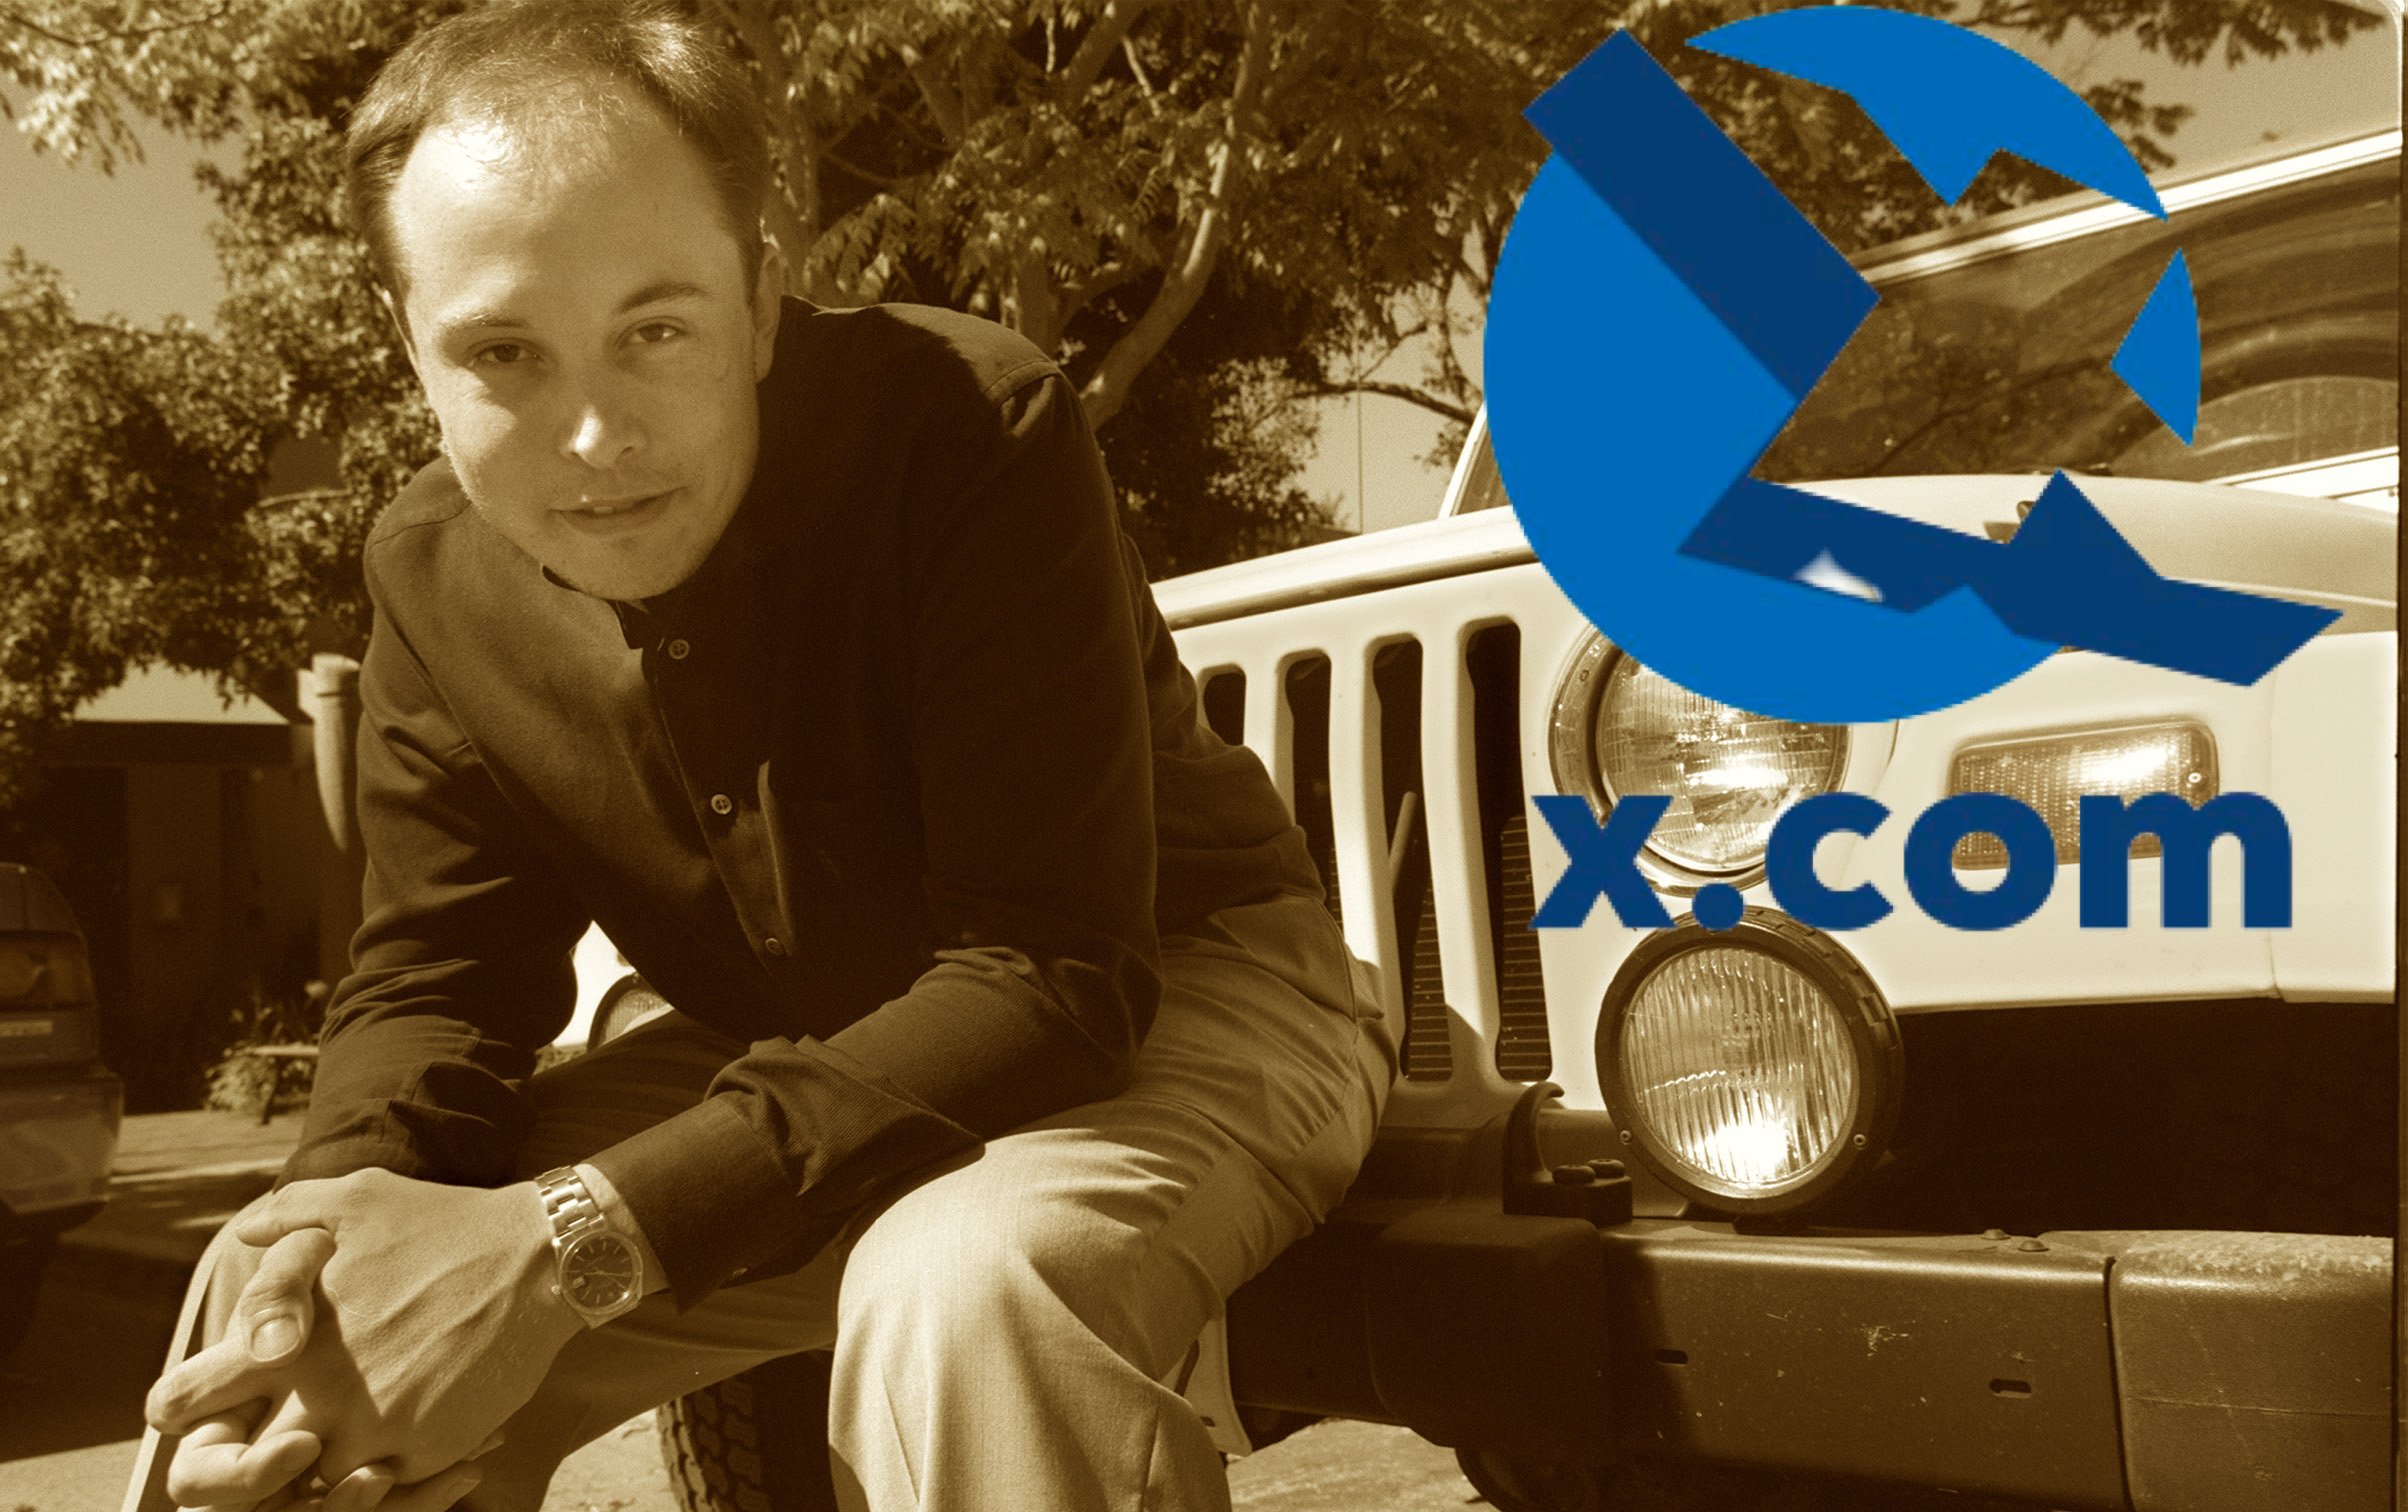 Elon Musk in 2000 and the X.com logo. 